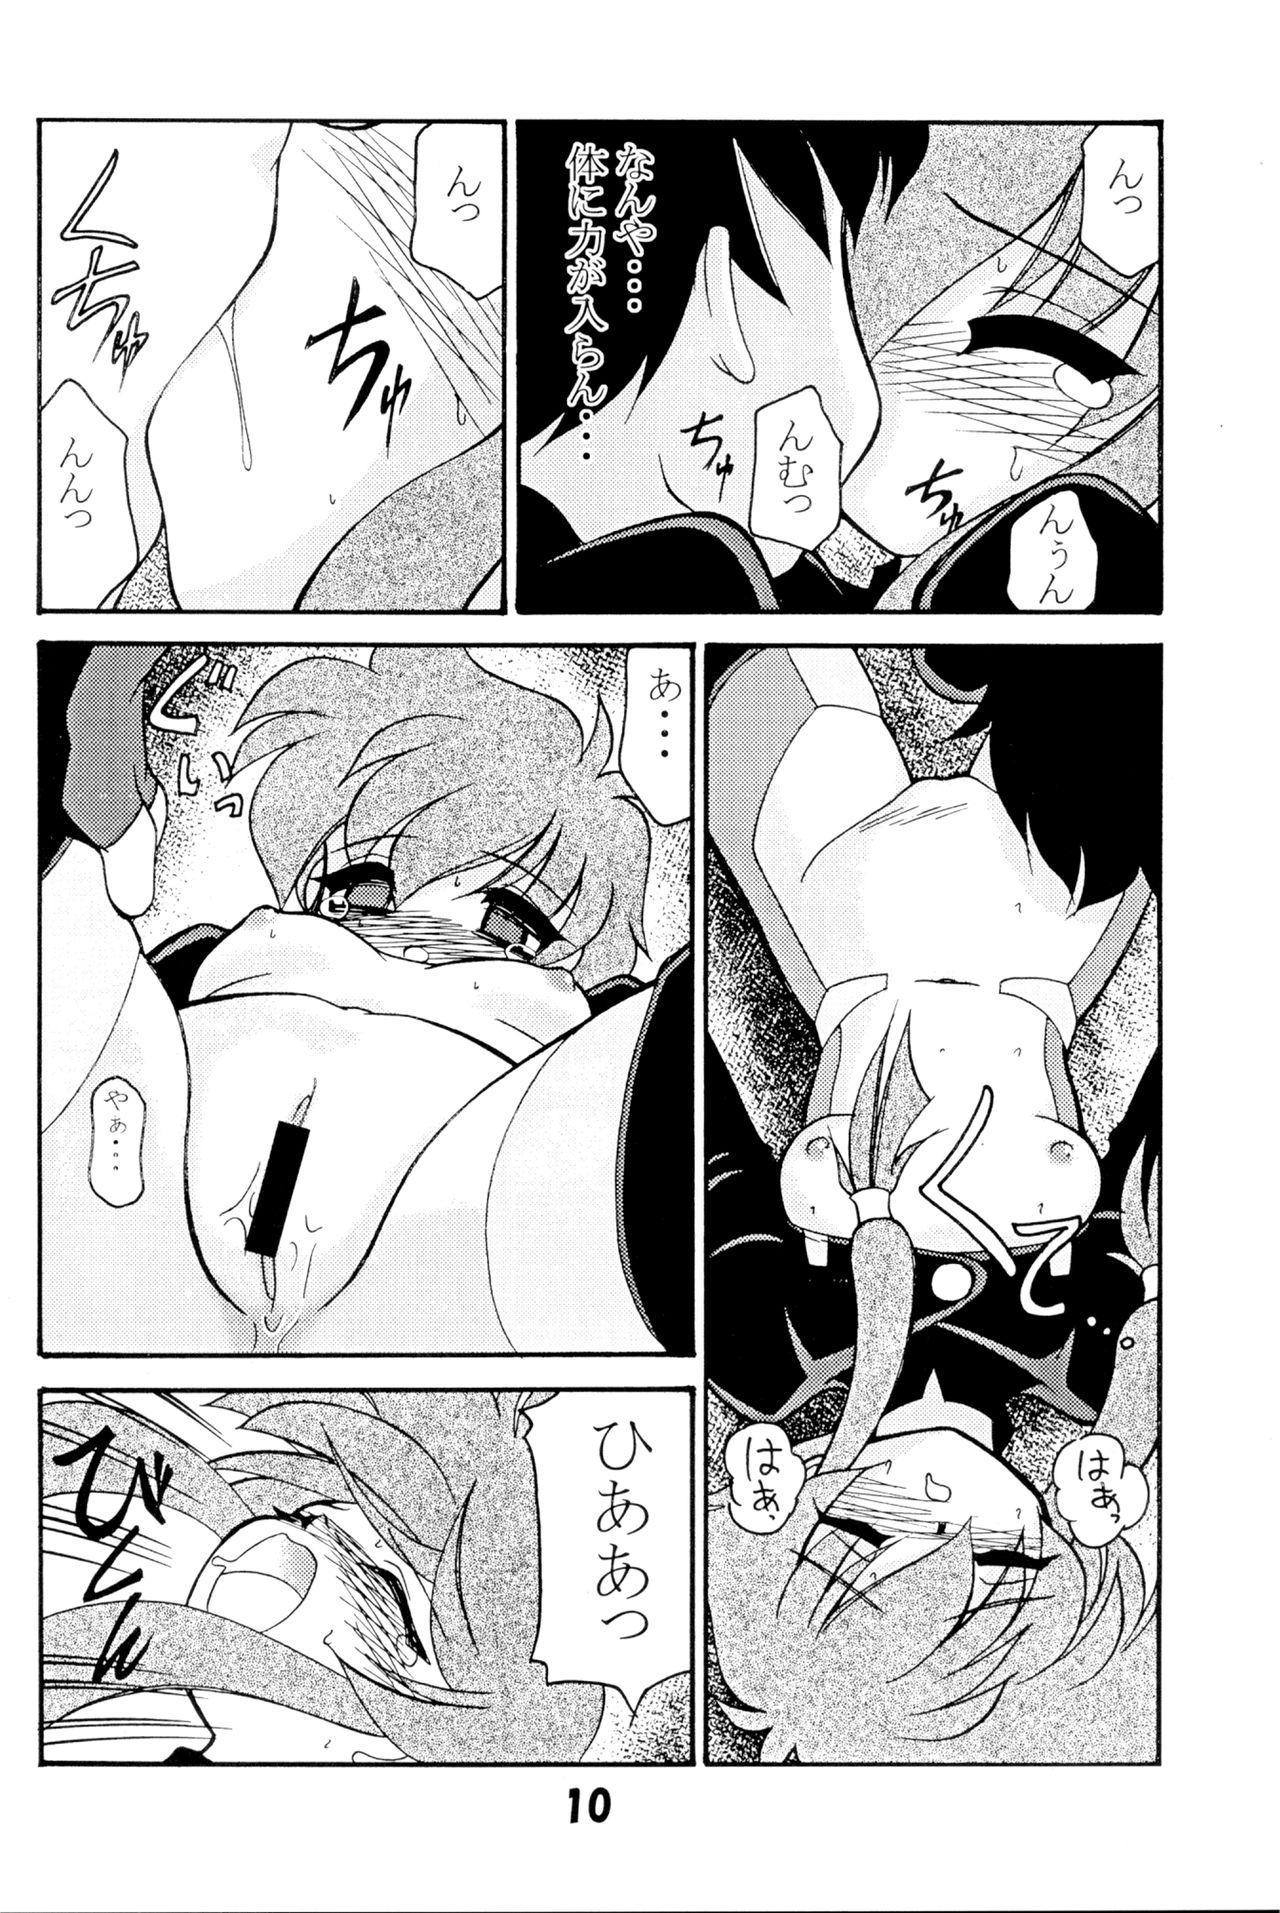 One VERSUS - Magic knight rayearth Angelic layer Room - Page 9